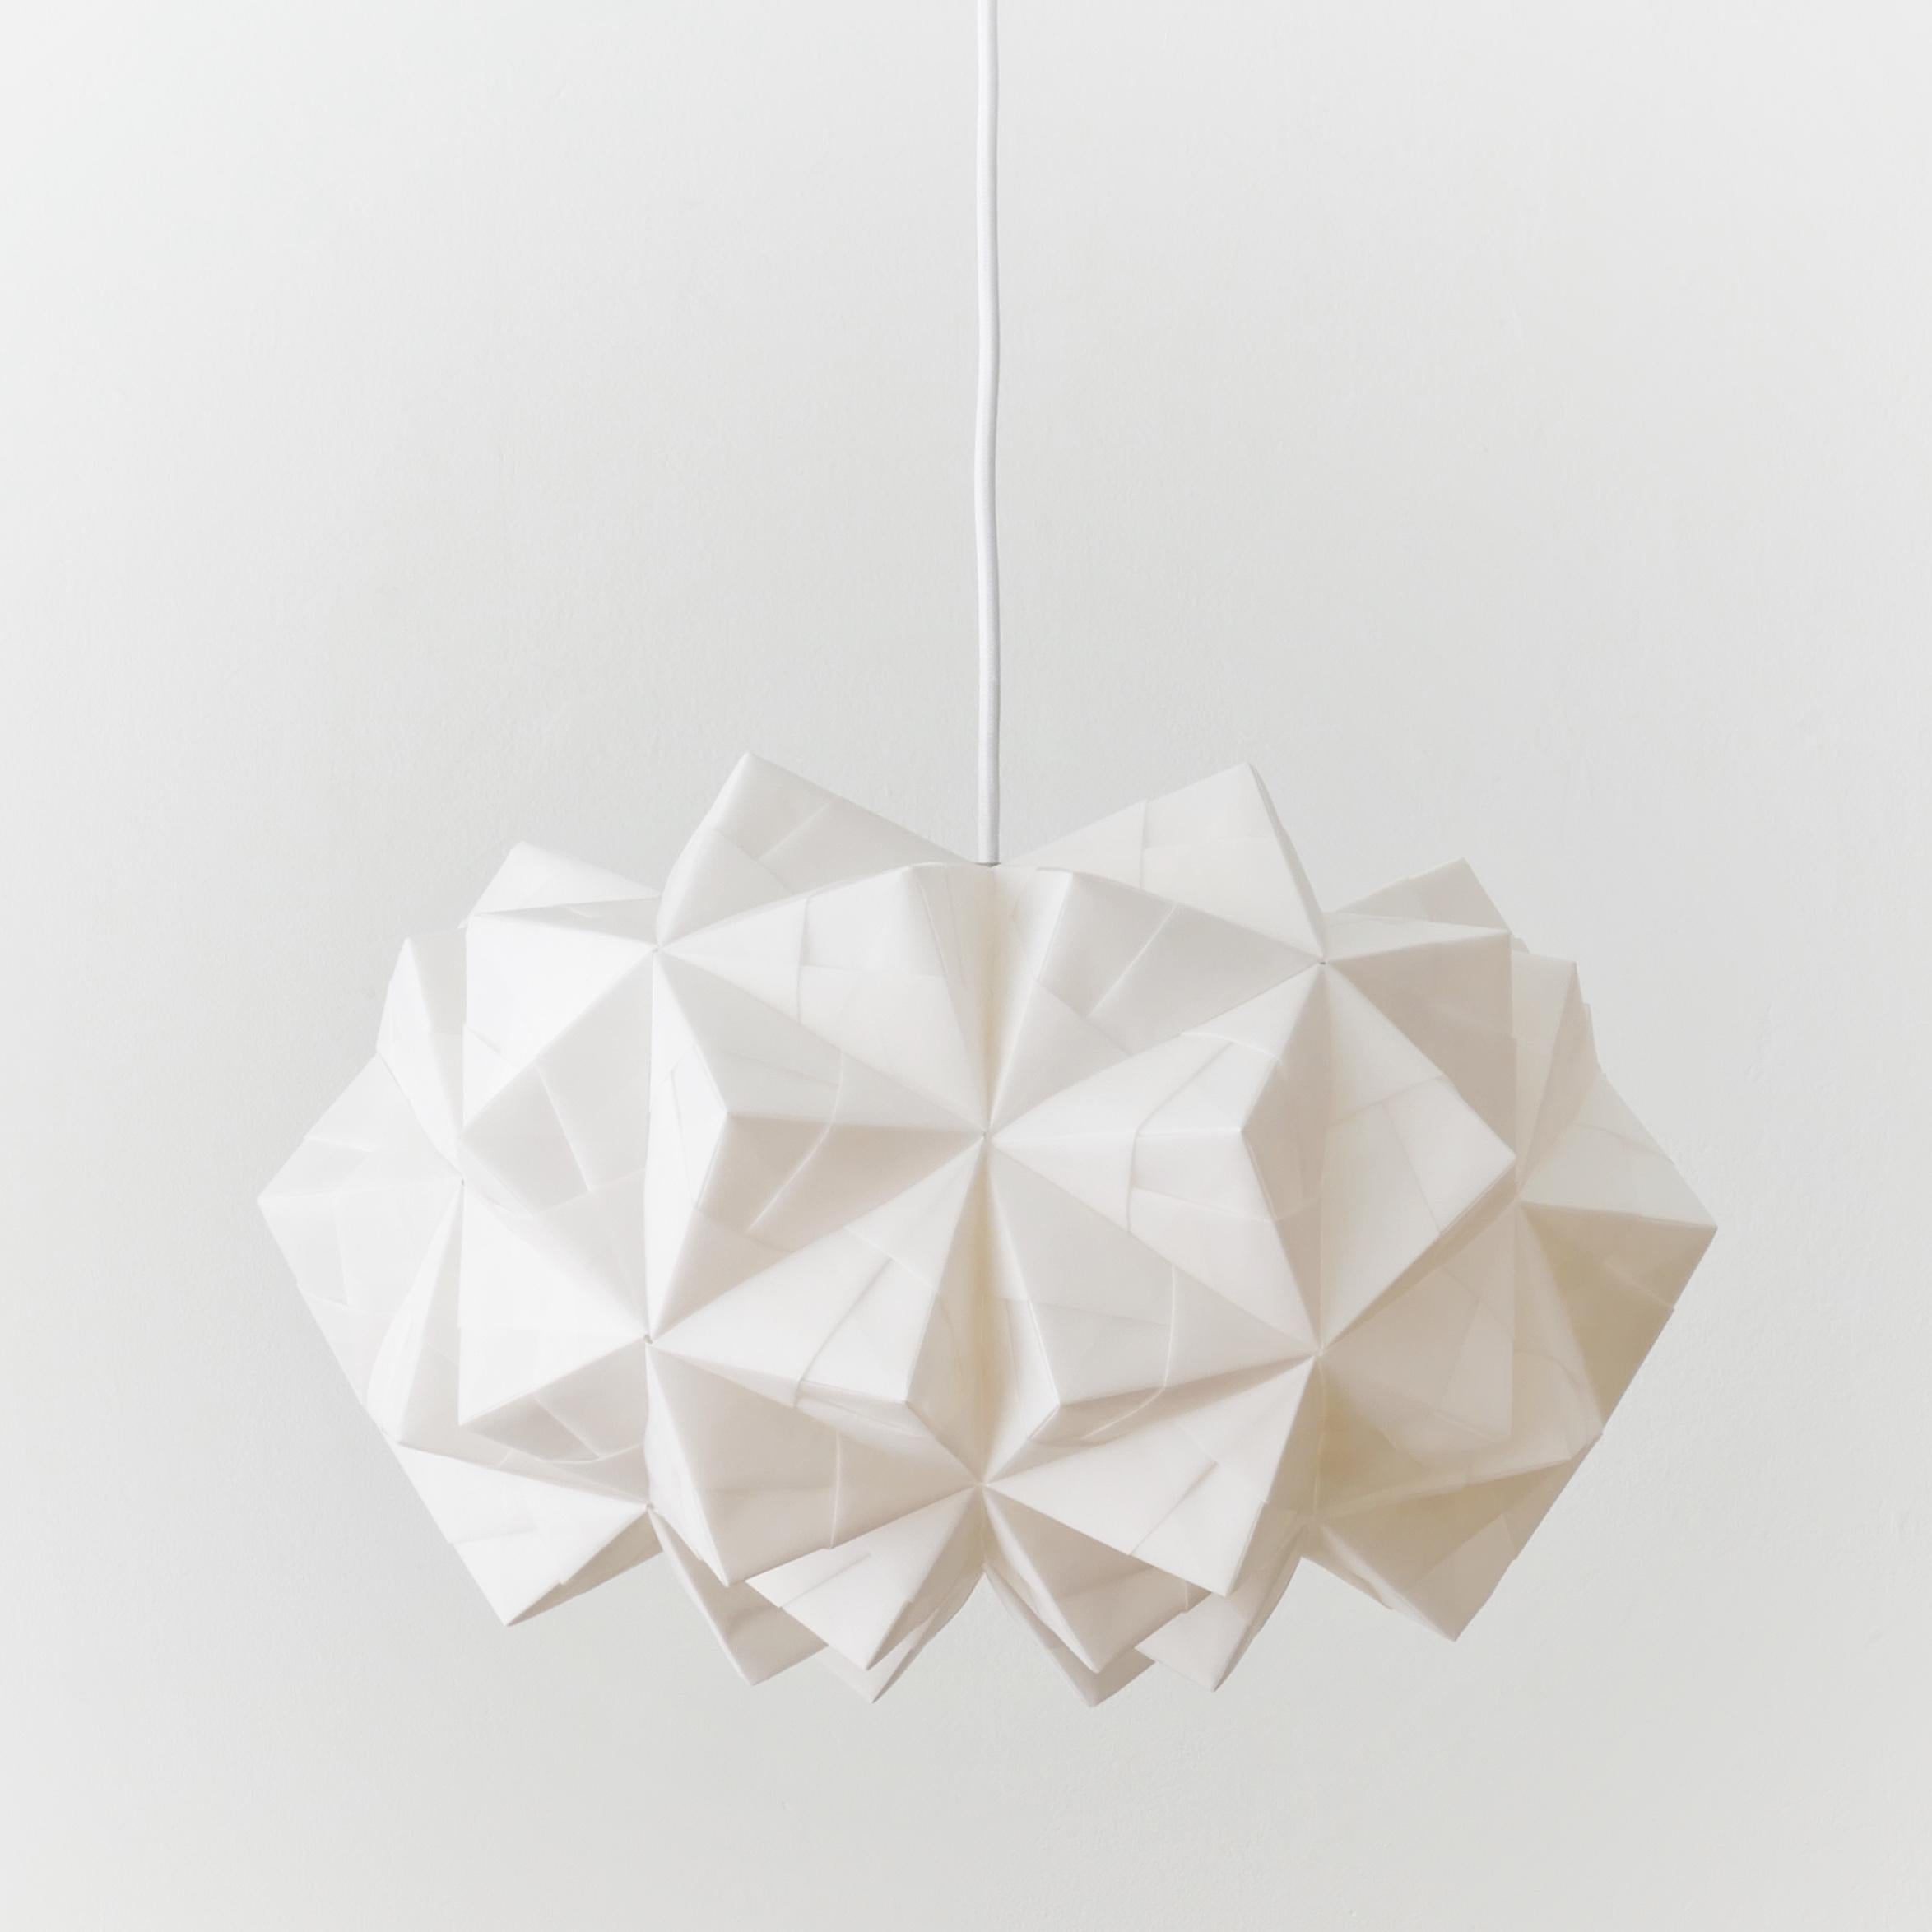 Hand-Crafted Japanese Style Hand-folded White Paper Pendant Lighting 